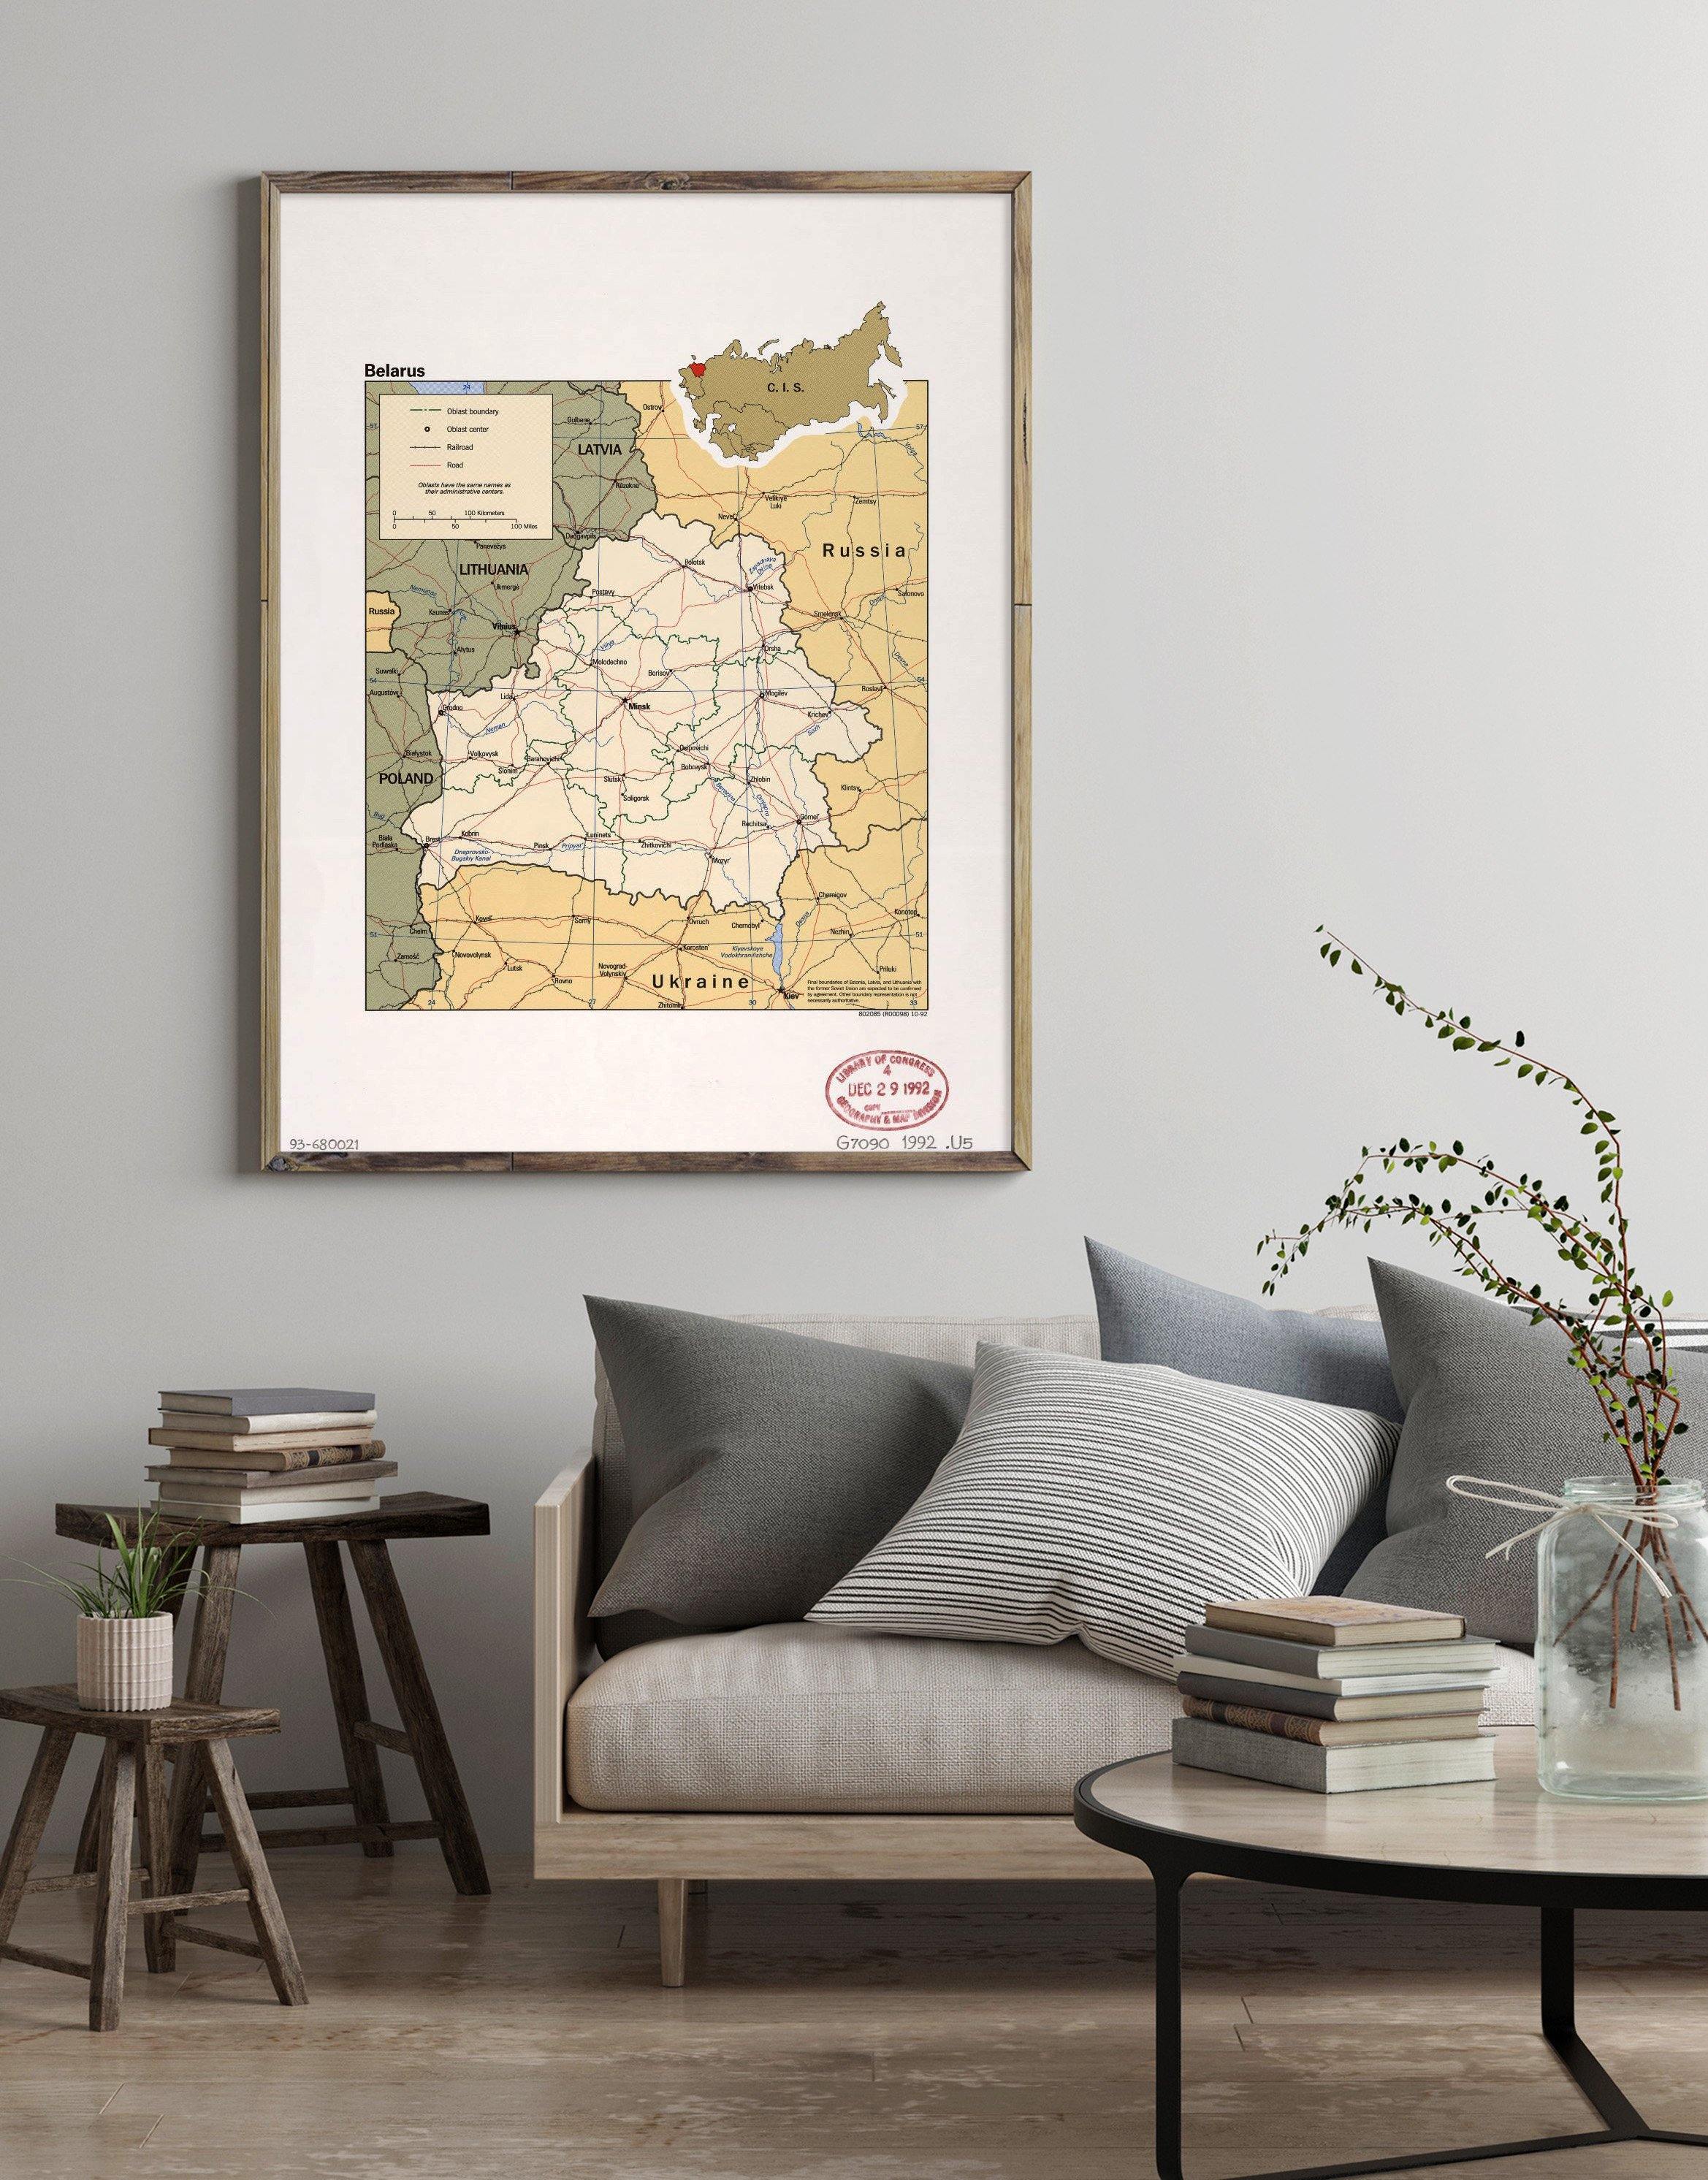 1992 Map| Belarus| Belarus Map Size: 18 inches x 24 inches |Fits 18x24 - New York Map Company